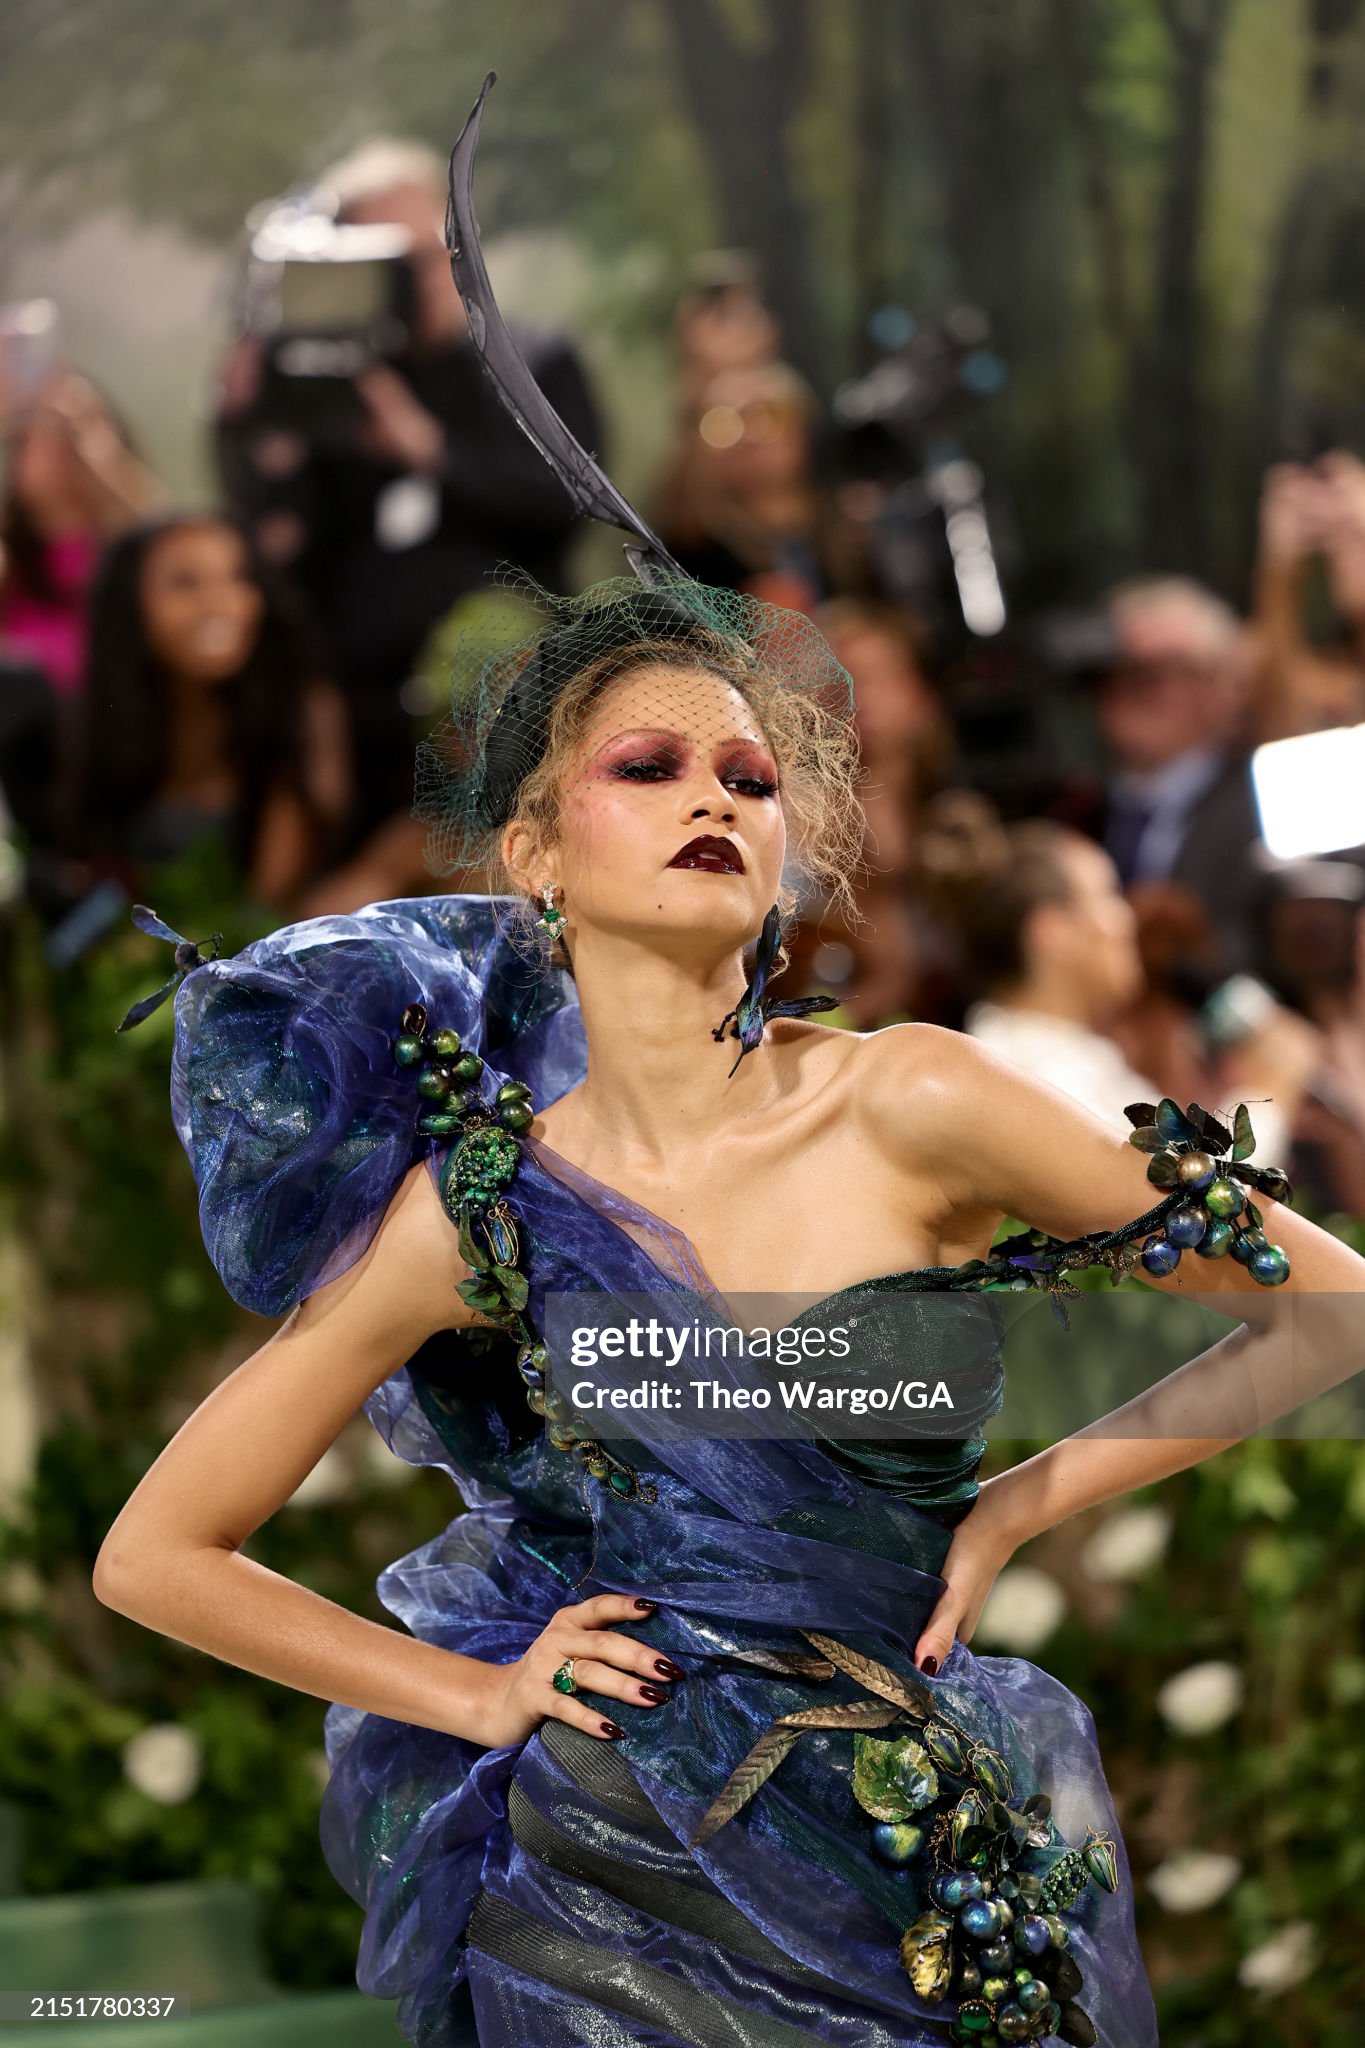 gettyimages-2151780337-2048x2048.jpg